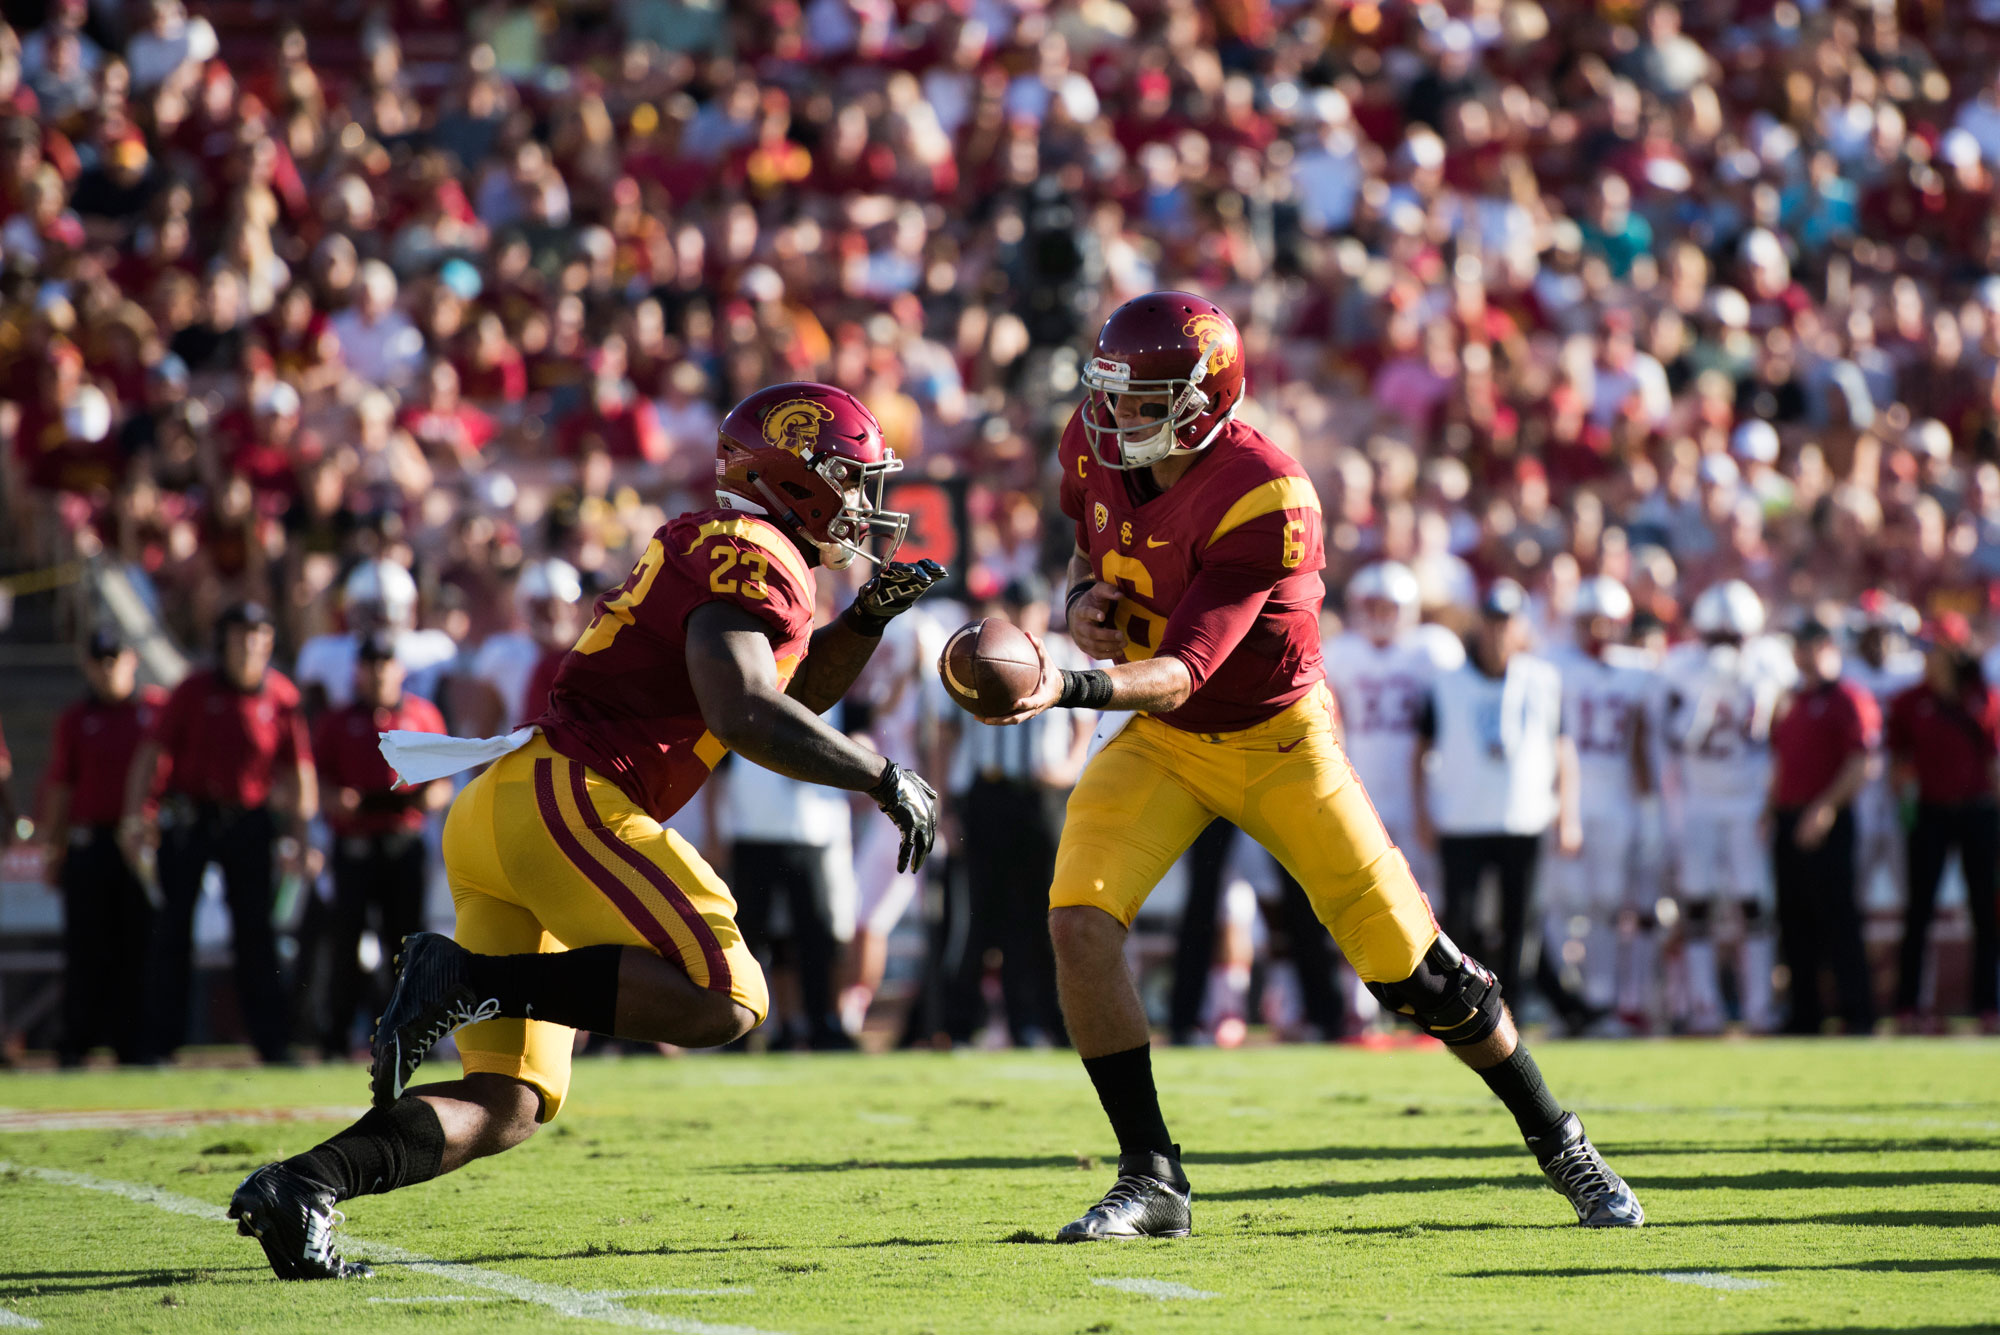 USC looks to bounce back against Sun Devils - Daily Trojan